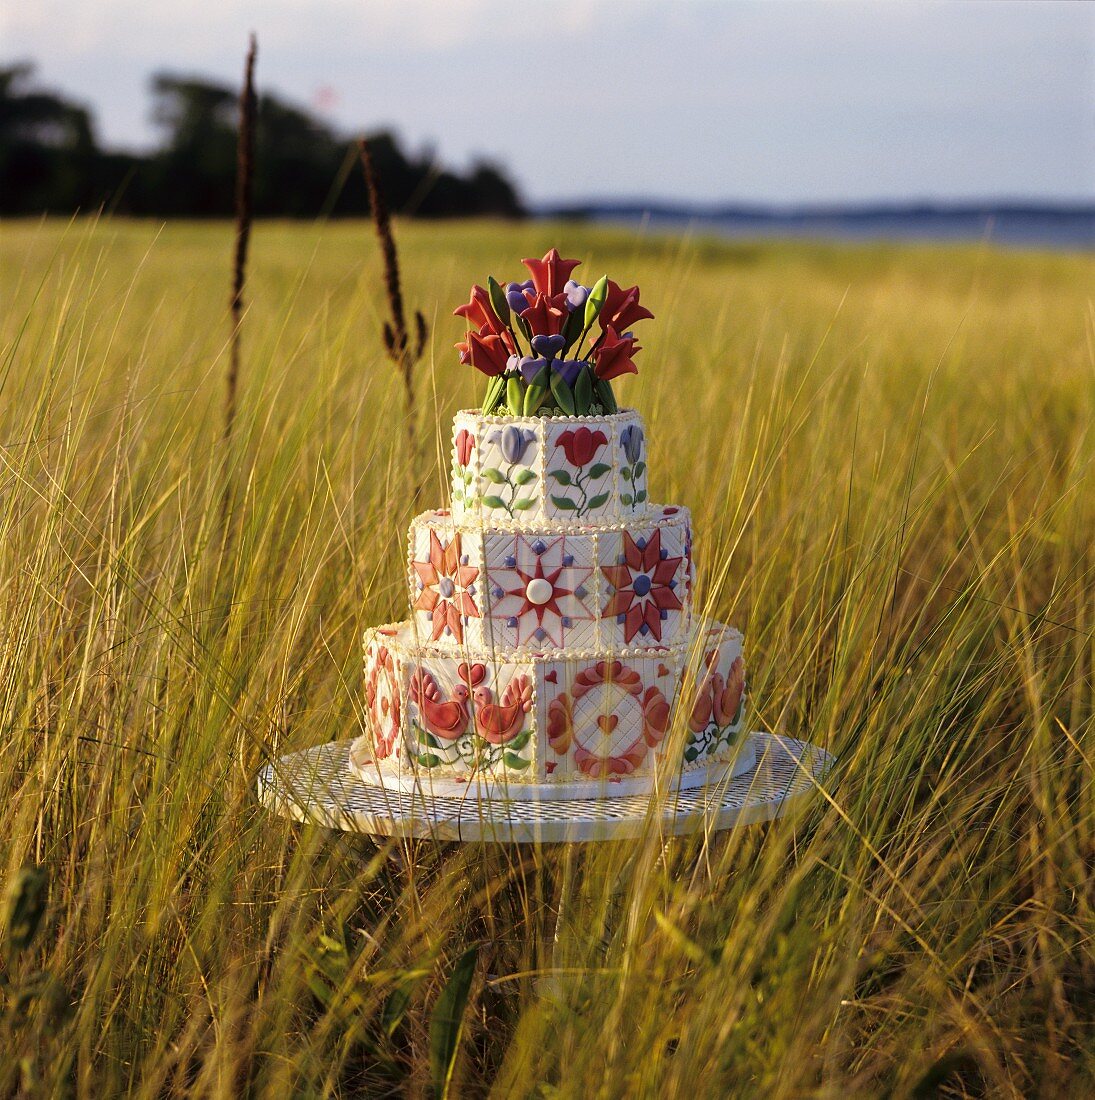 Three Tiered Wedding Cake Decorated with Red and Blue Flowers and Red Love Birds; In a Field